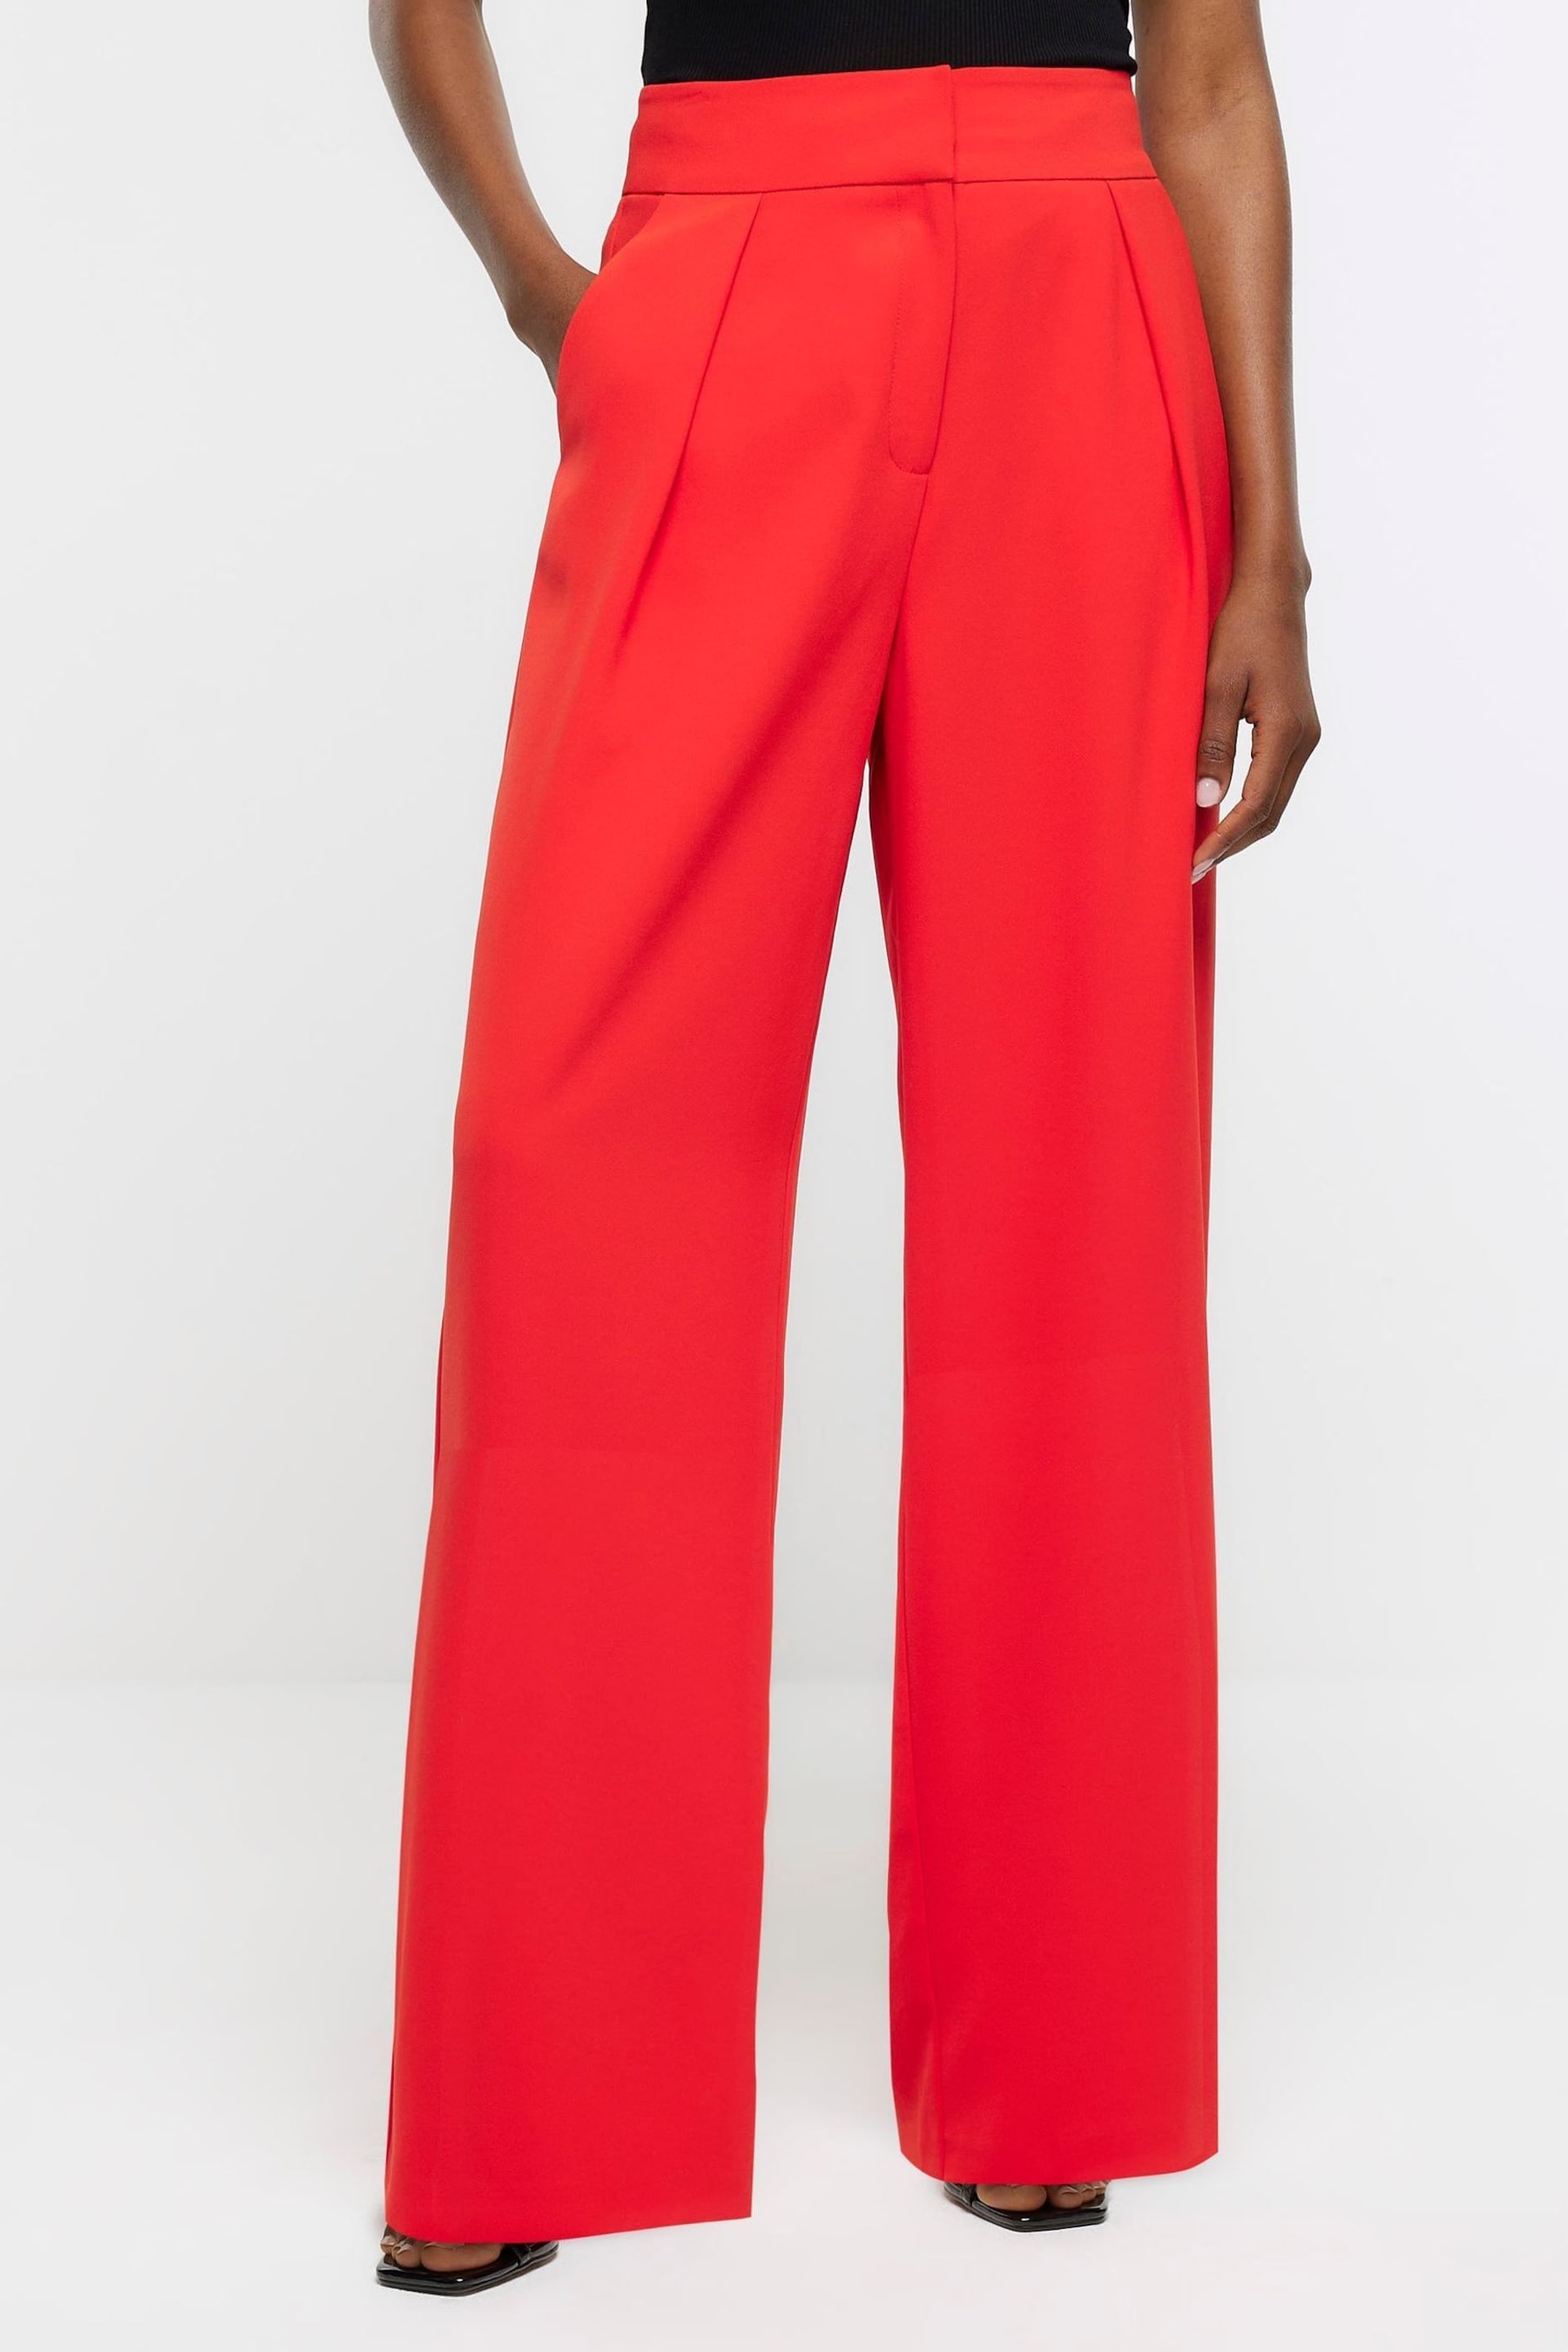 River Island Red Wide Leg Pleated Clean Trousers - Image 4 of 5